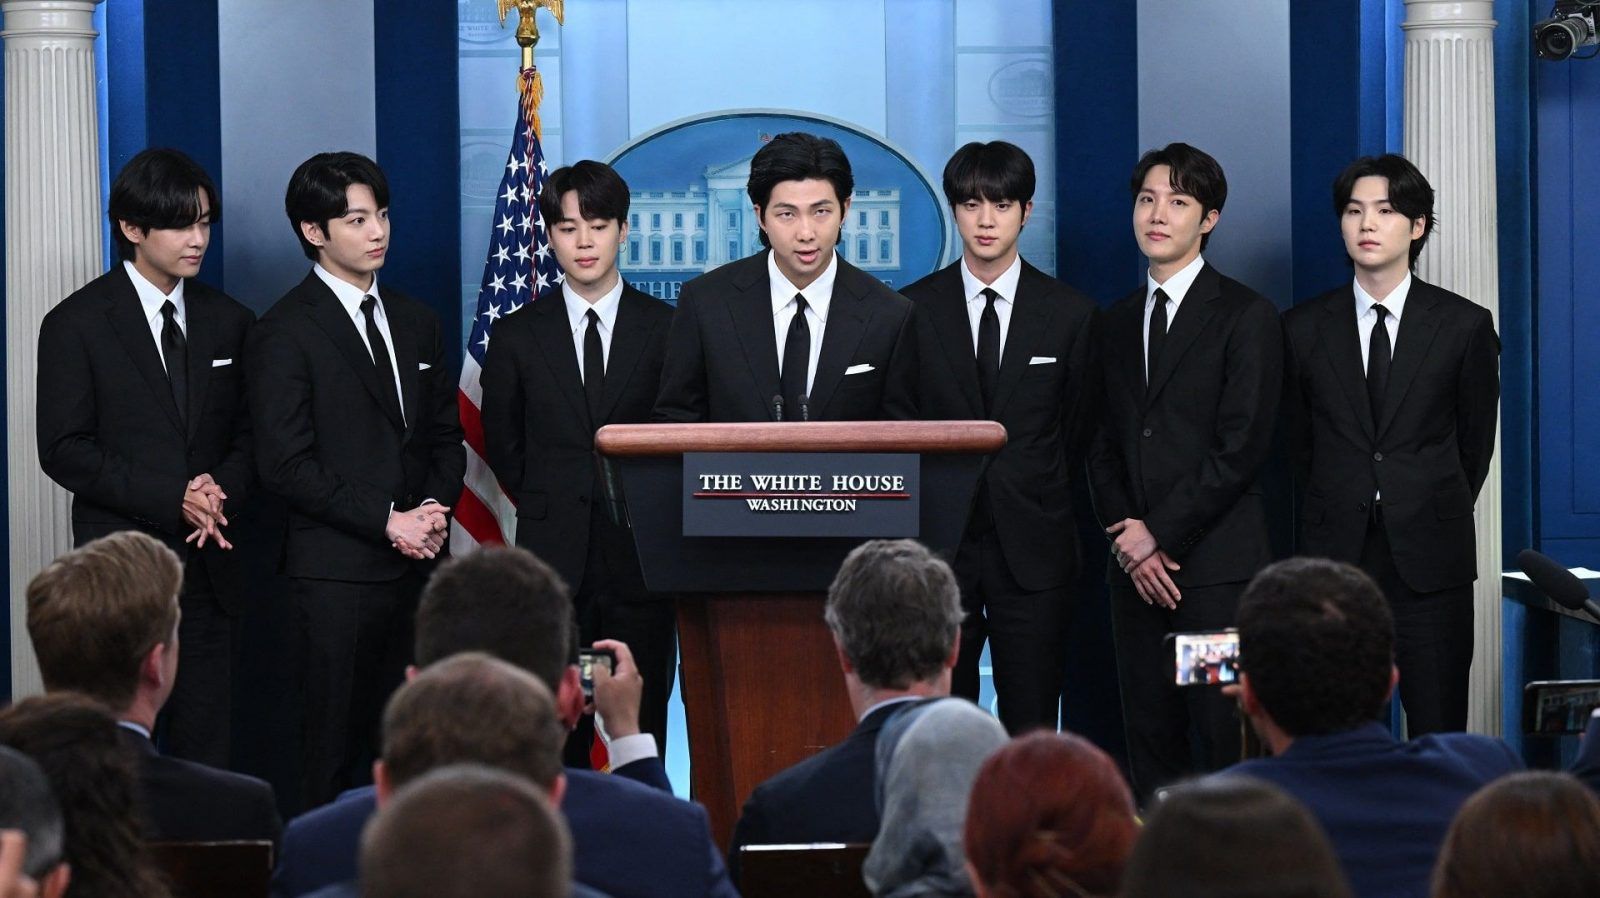 BTS Discusses Anti-Asian Hate Crimes at White House Press Briefing